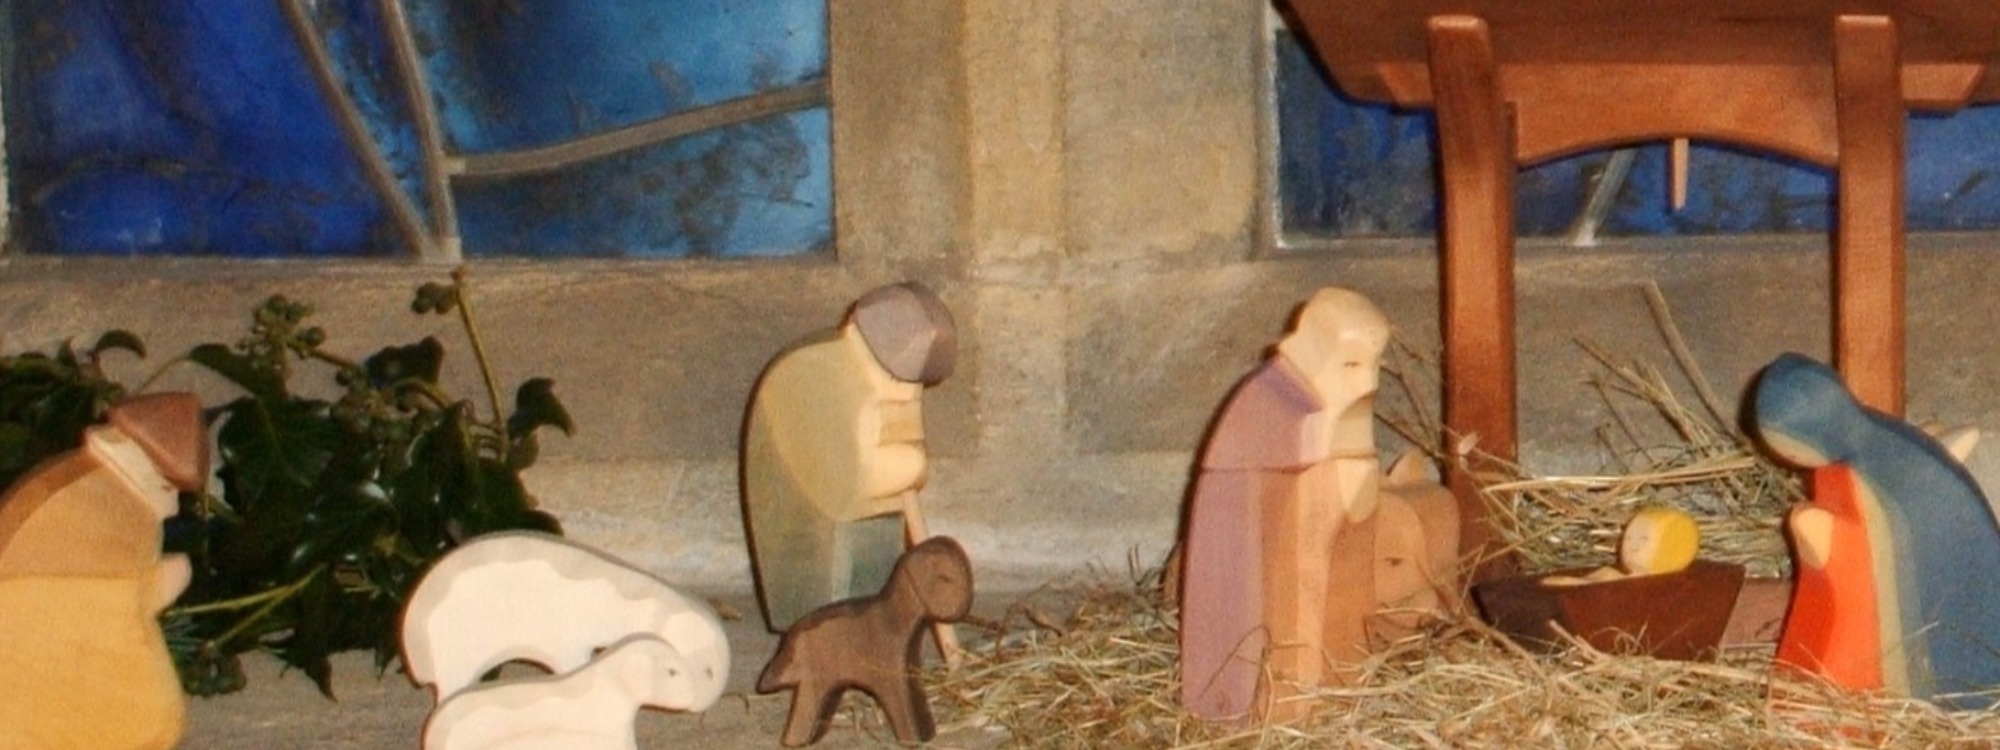 CHRISTMAS SERVICES *All welcome*DETAILS HERE